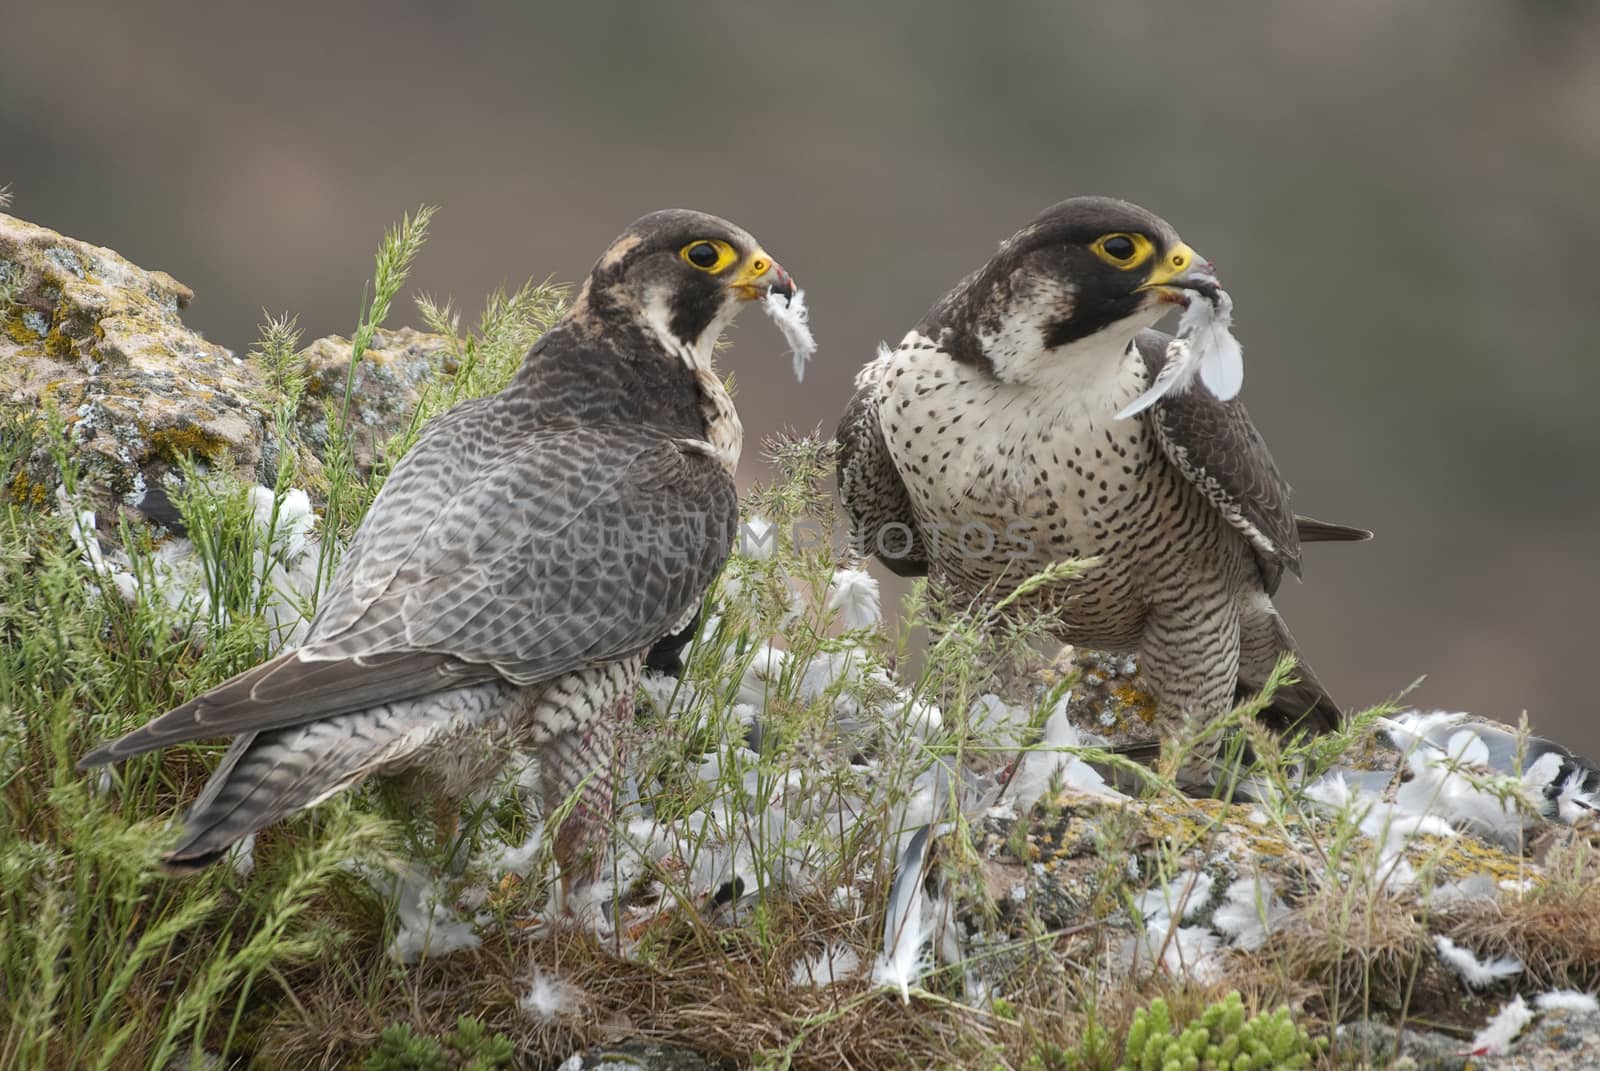 Peregrine falcon on the rock. Bird of prey, Couple sharing their by jalonsohu@gmail.com